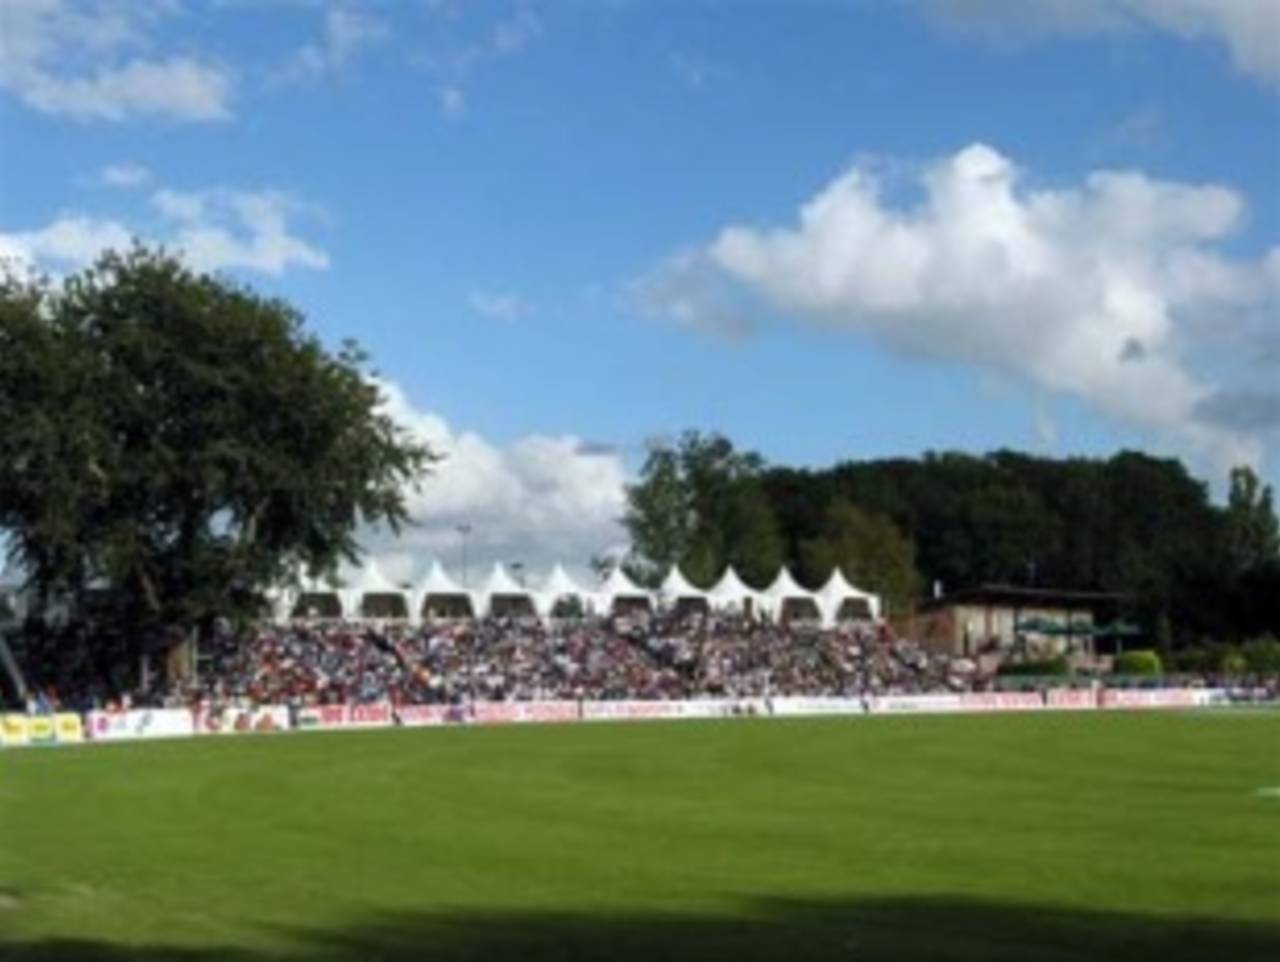 The VRA ground in Amstelveen [above] has hosted ten ODIs, including a World Cup fixture&nbsp;&nbsp;&bull;&nbsp;&nbsp;Jan Spits/Jan Spits